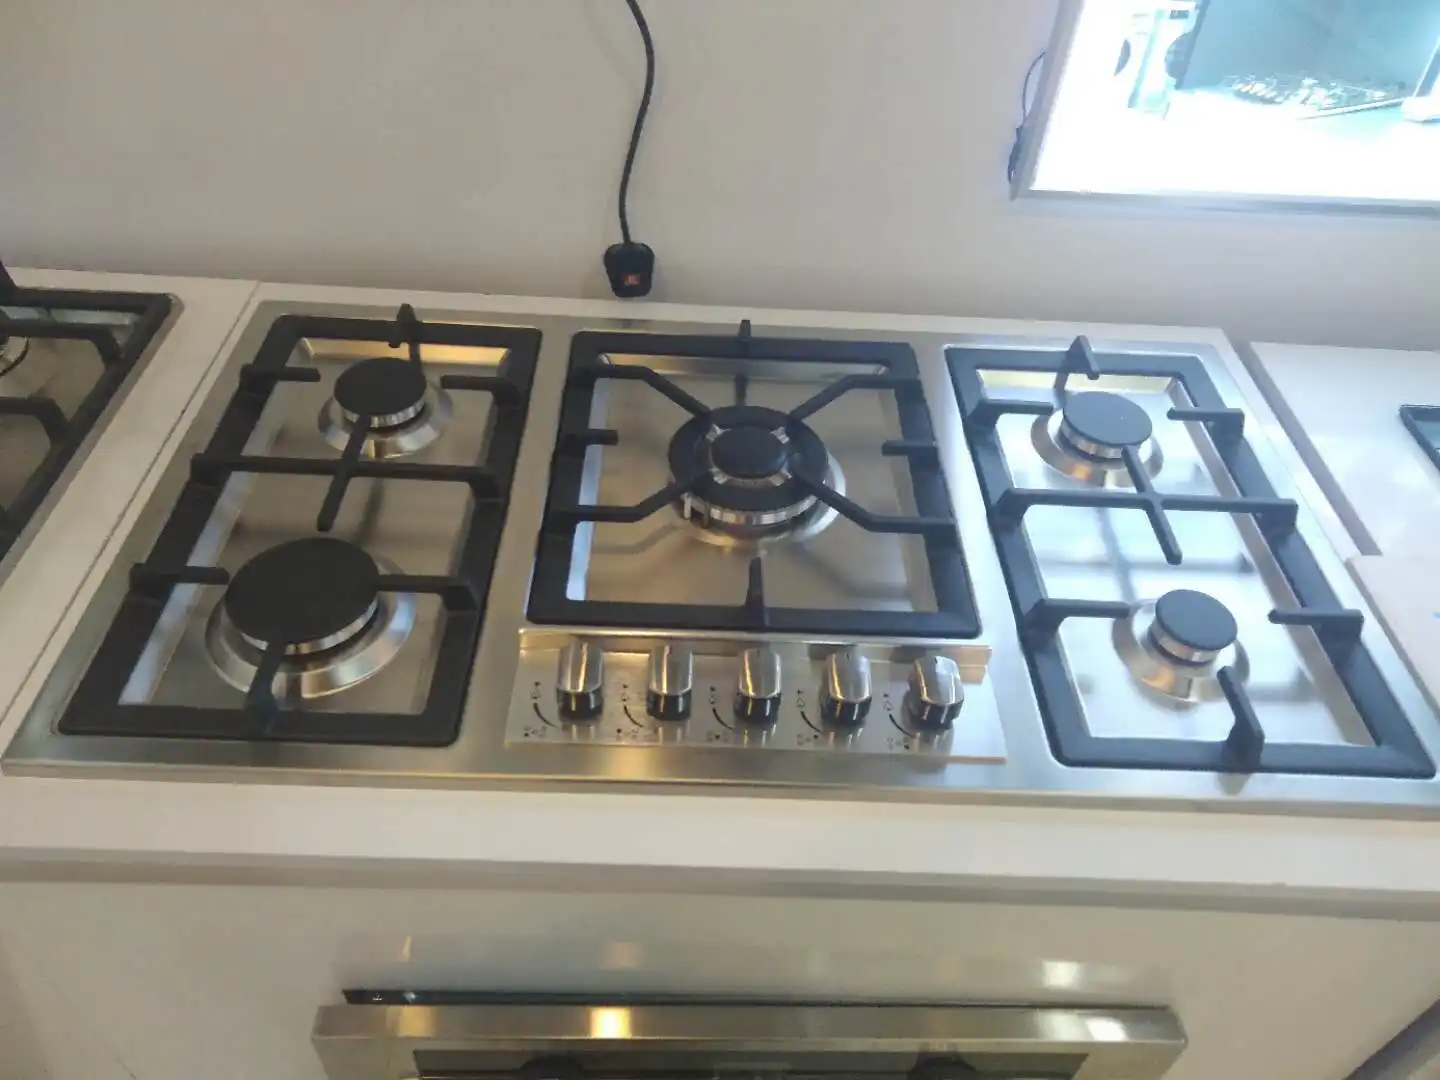 5 Burners 91cm Stainless Steel Build-in Gas Hob Cooktop